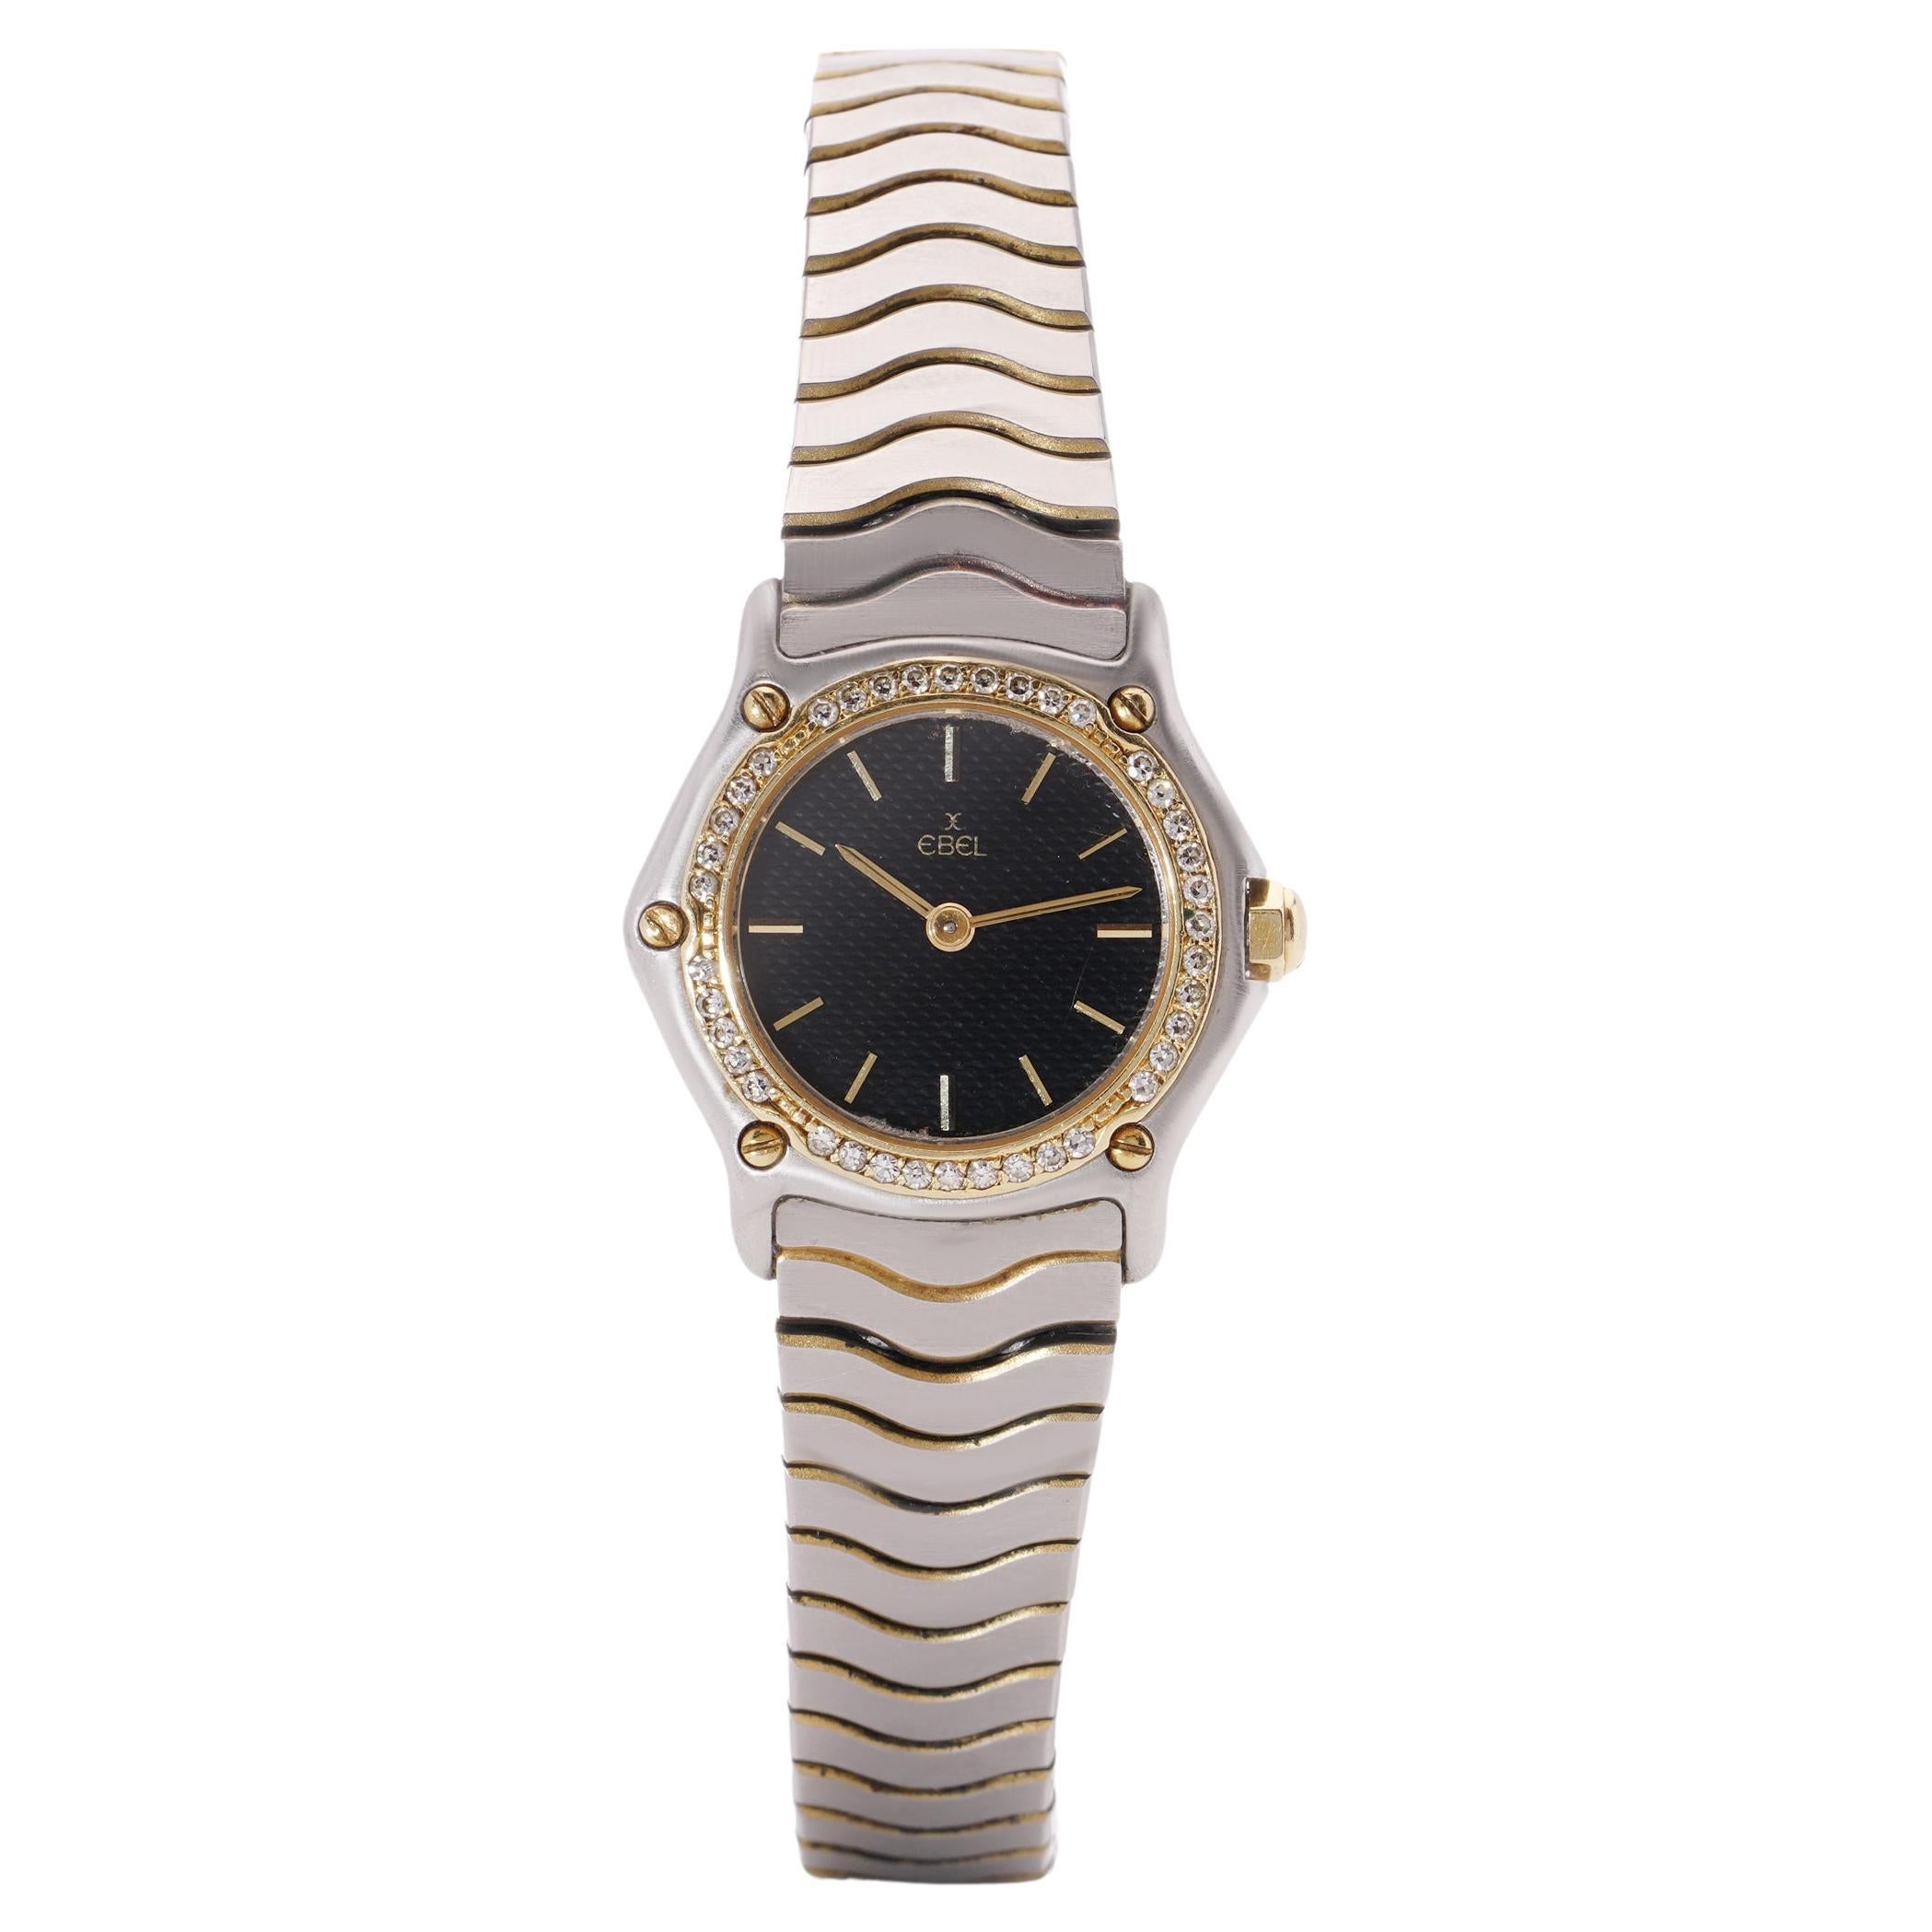 Ebel stainless steel and 18kt gold women's sports watch with diamond bezel 